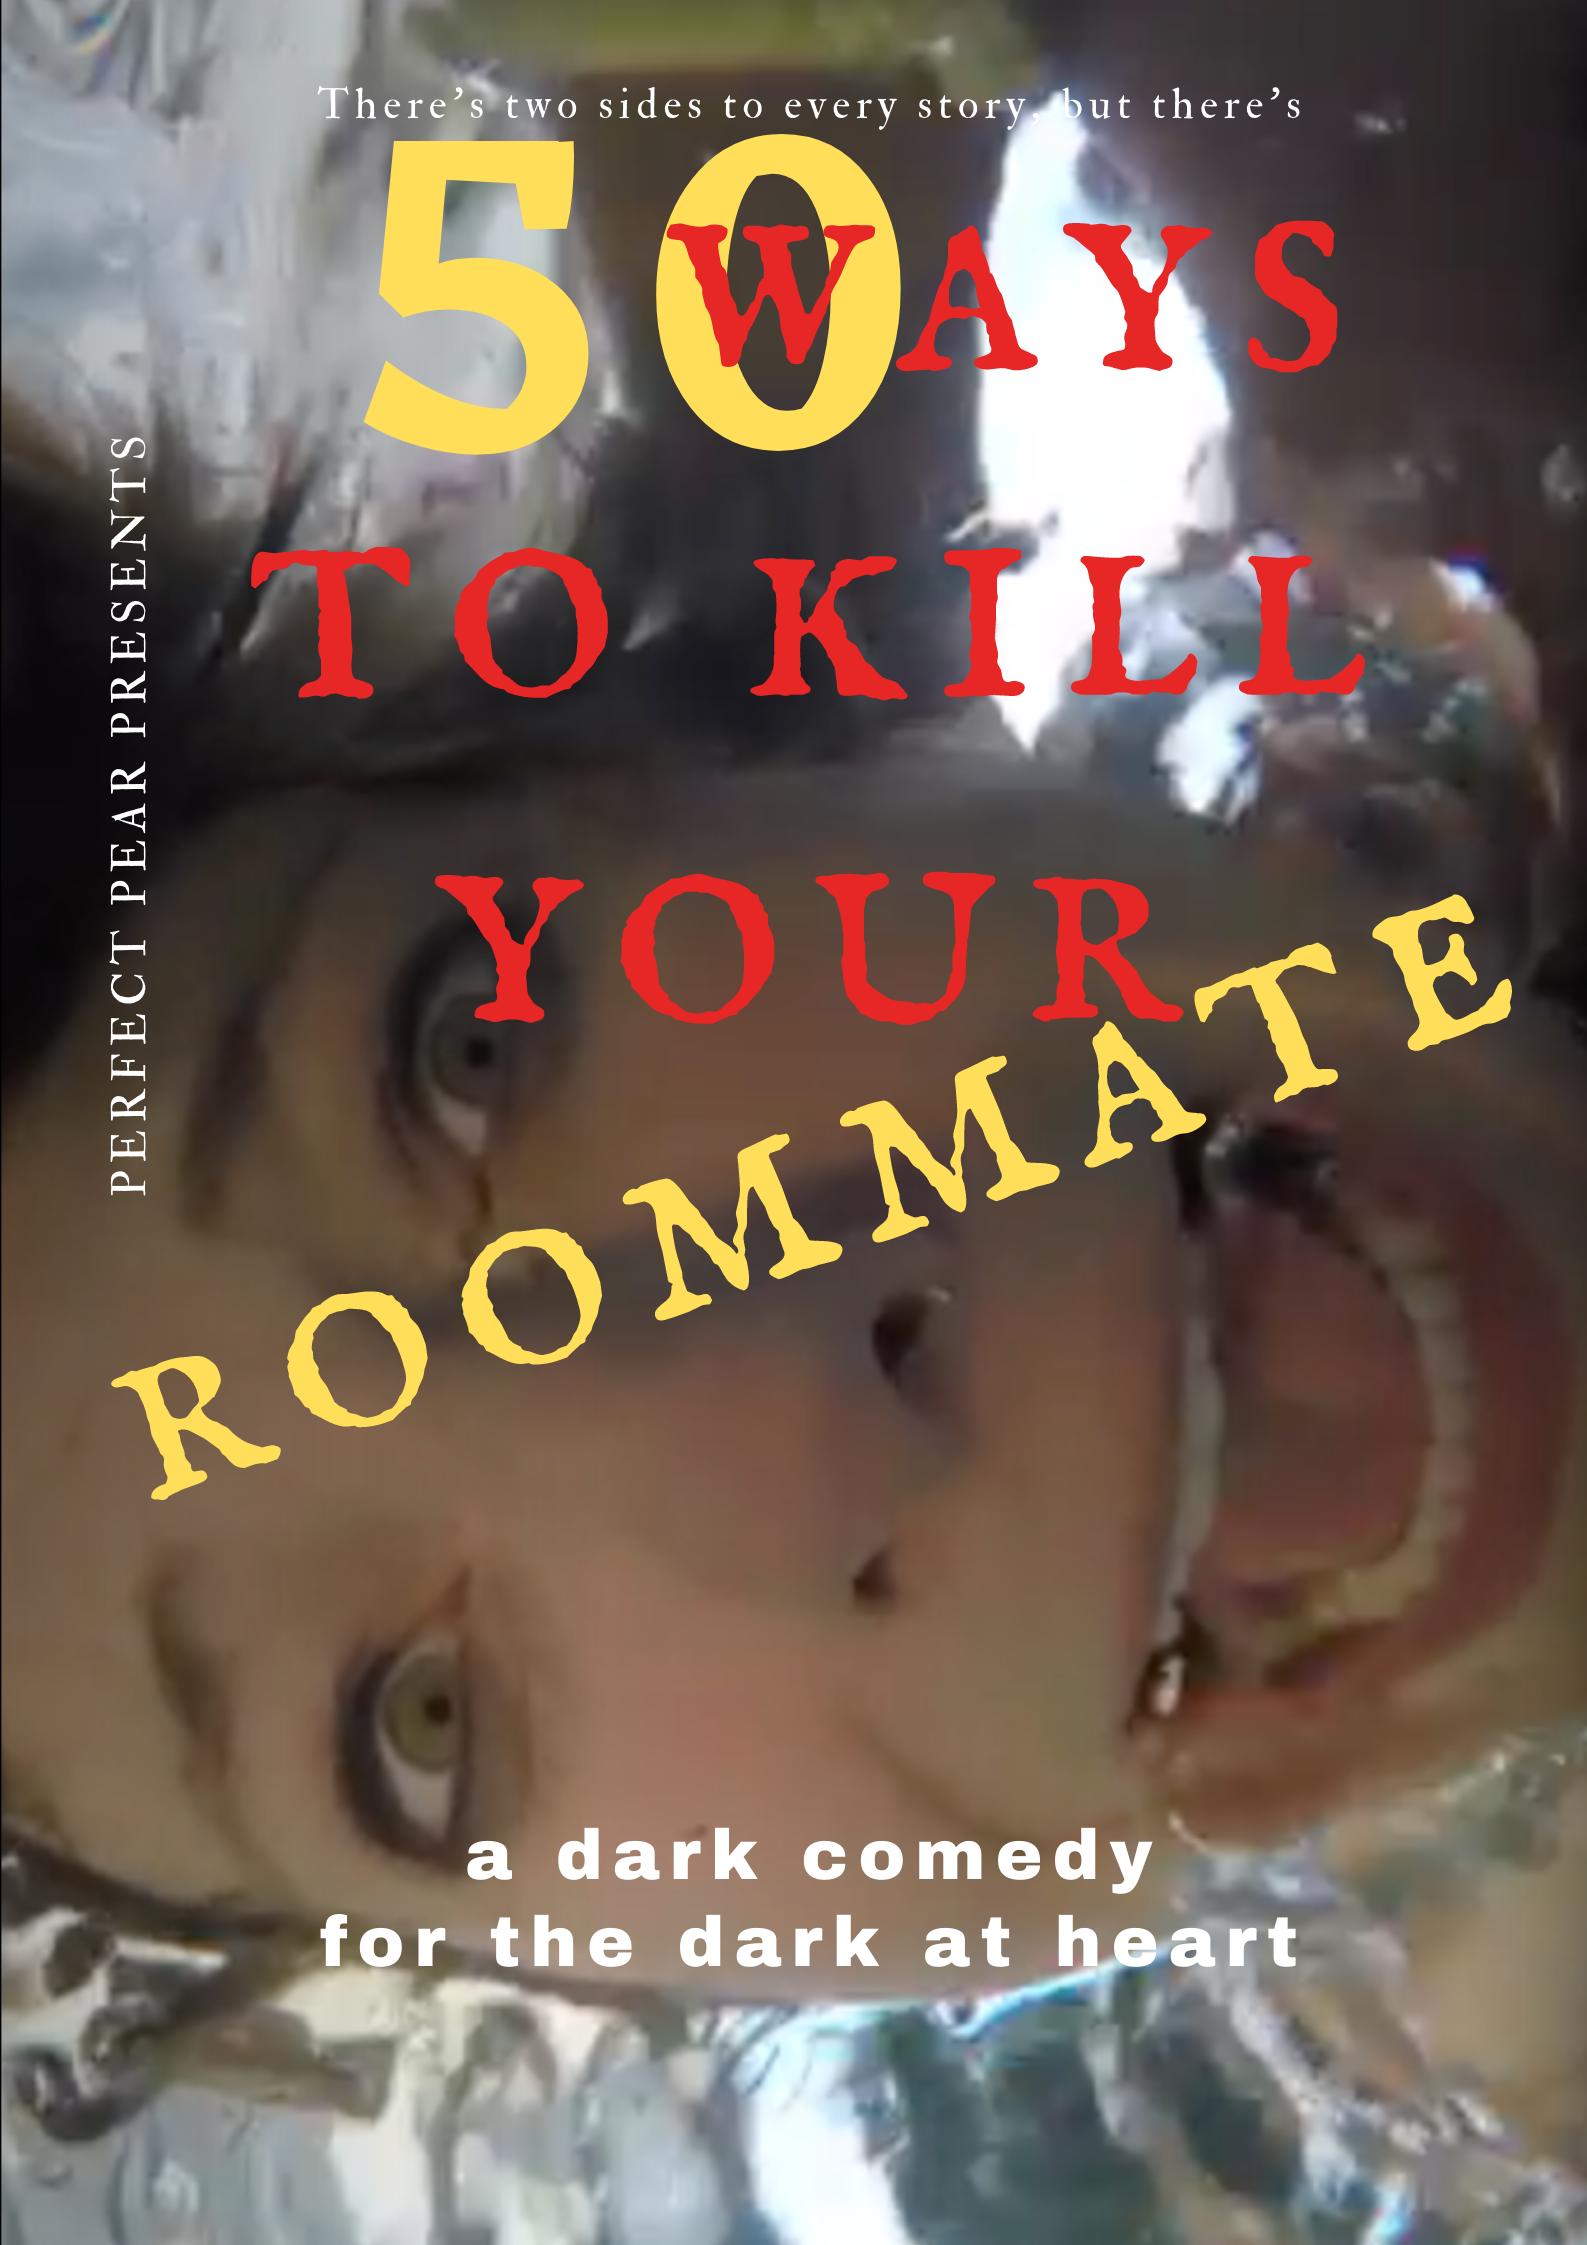 50 Ways to Kill Your Roommate